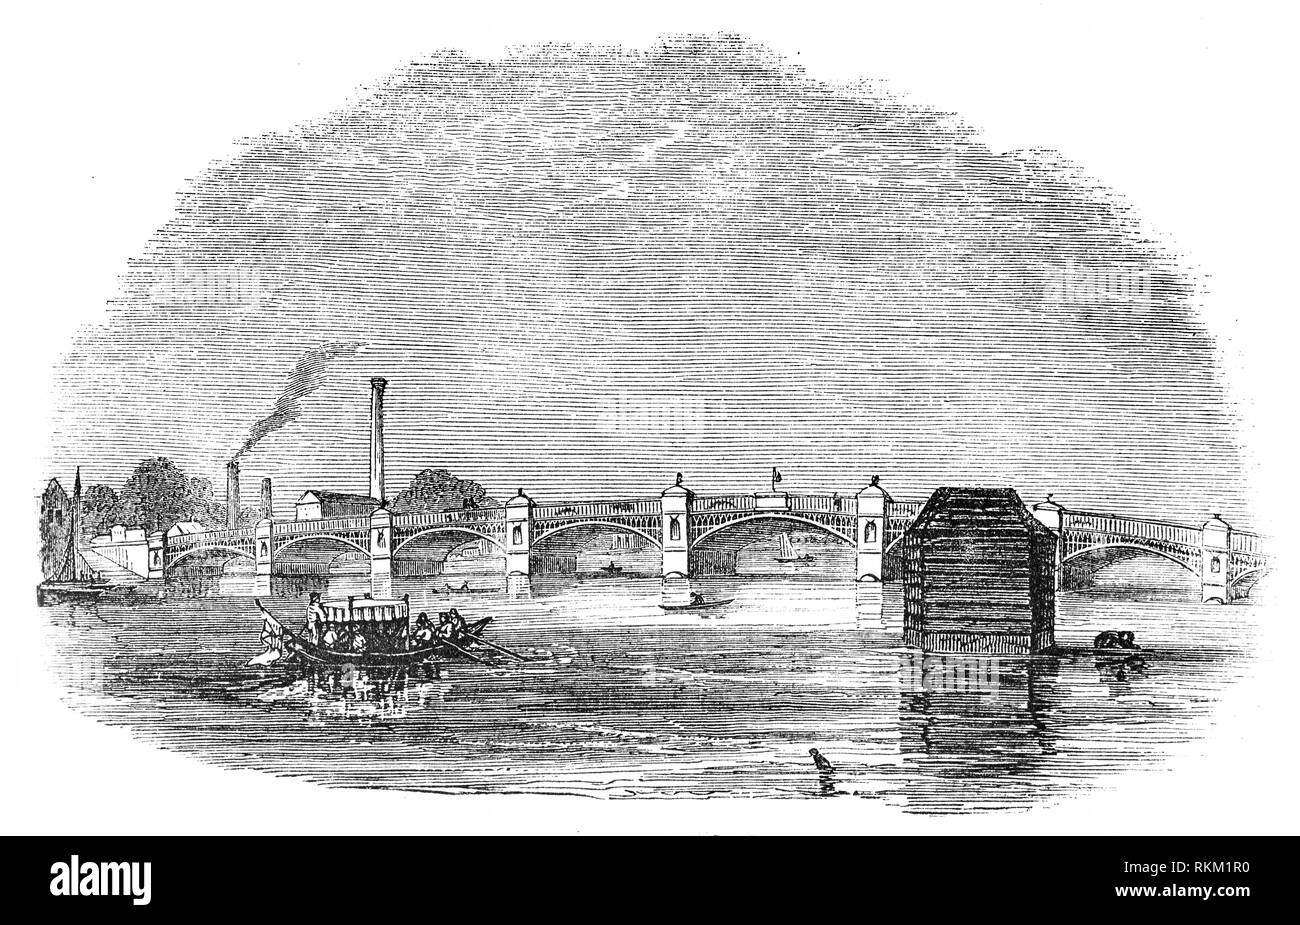 The Old Vauxhall Bridge crossed the River Thames between Vauxhall on the south bank and Pimlico on the north bank. Built on the site of a former ferry it was built between 1809 and 1816.  John Rennie was commissioned to design and build a new stone bridge, but following financial difficulties submitted a new design for an iron bridge, a plan that was rejected. Construction began on an iron bridge designed by Samuel Bentham, but his design was abandoned for the second time until James Walker, a Scottish civil engineer, was appointed to design and build the first iron bridge across the Thames. Stock Photo